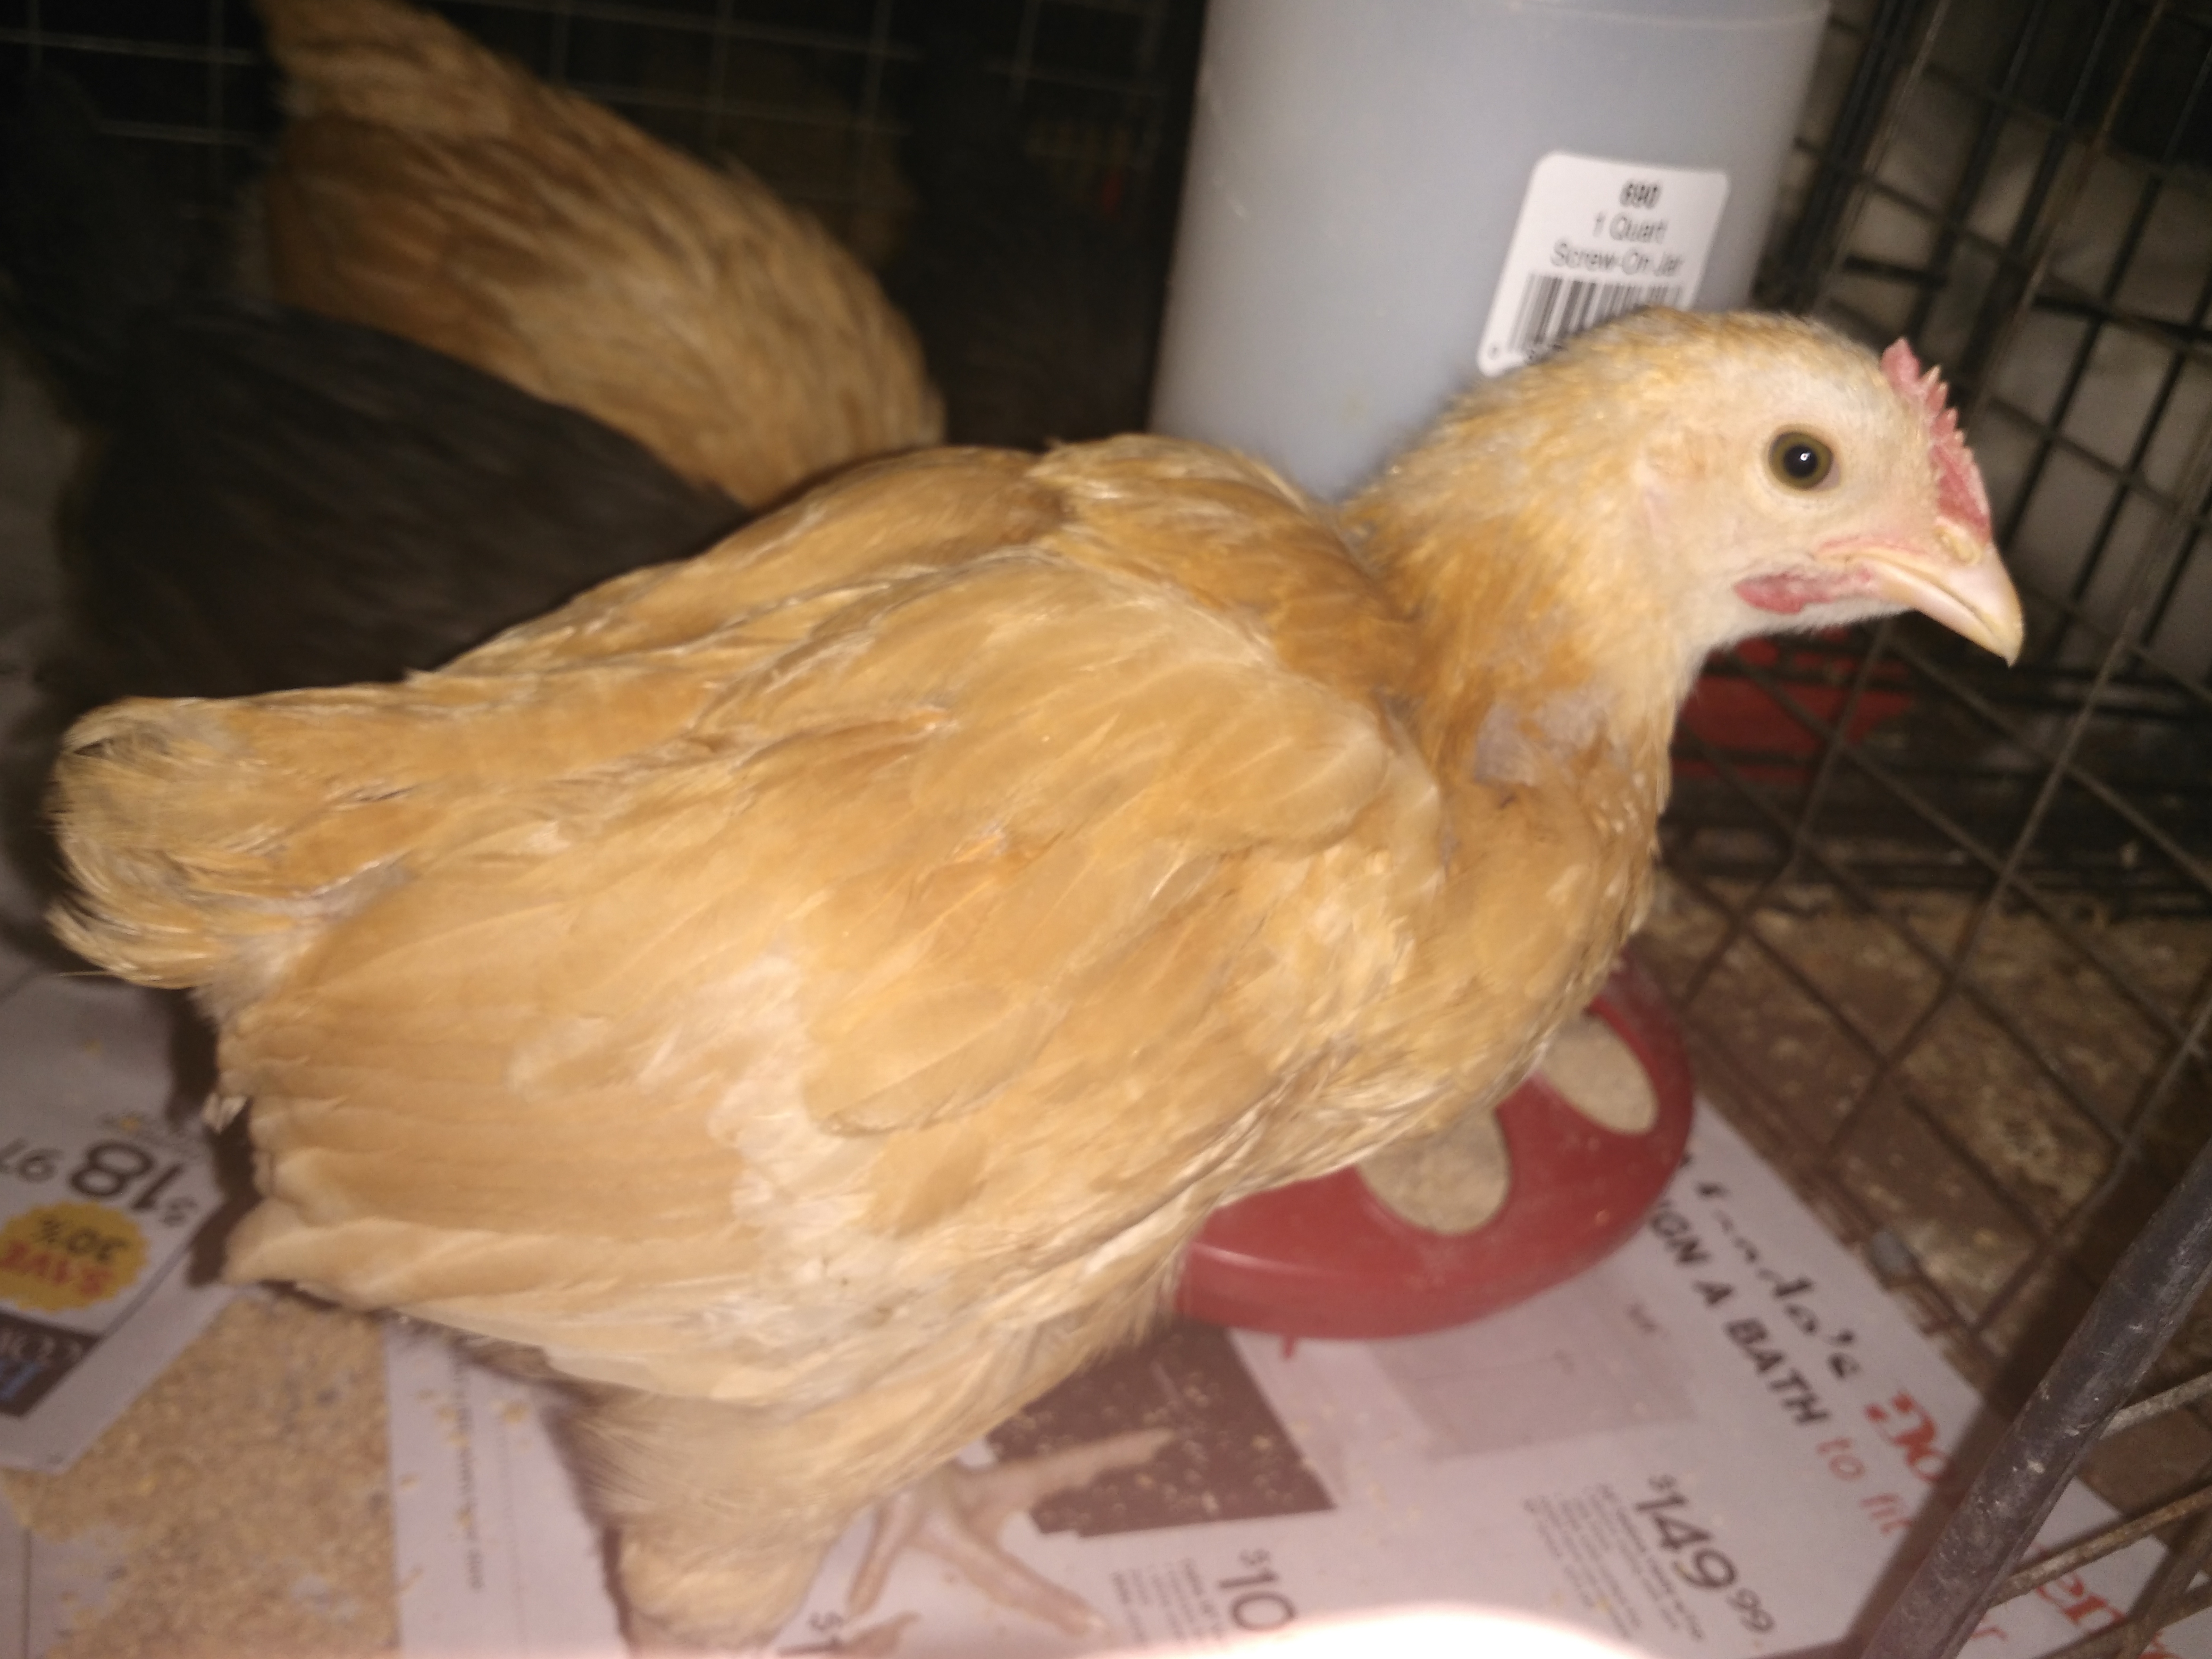 This hen looks like a Rooster?